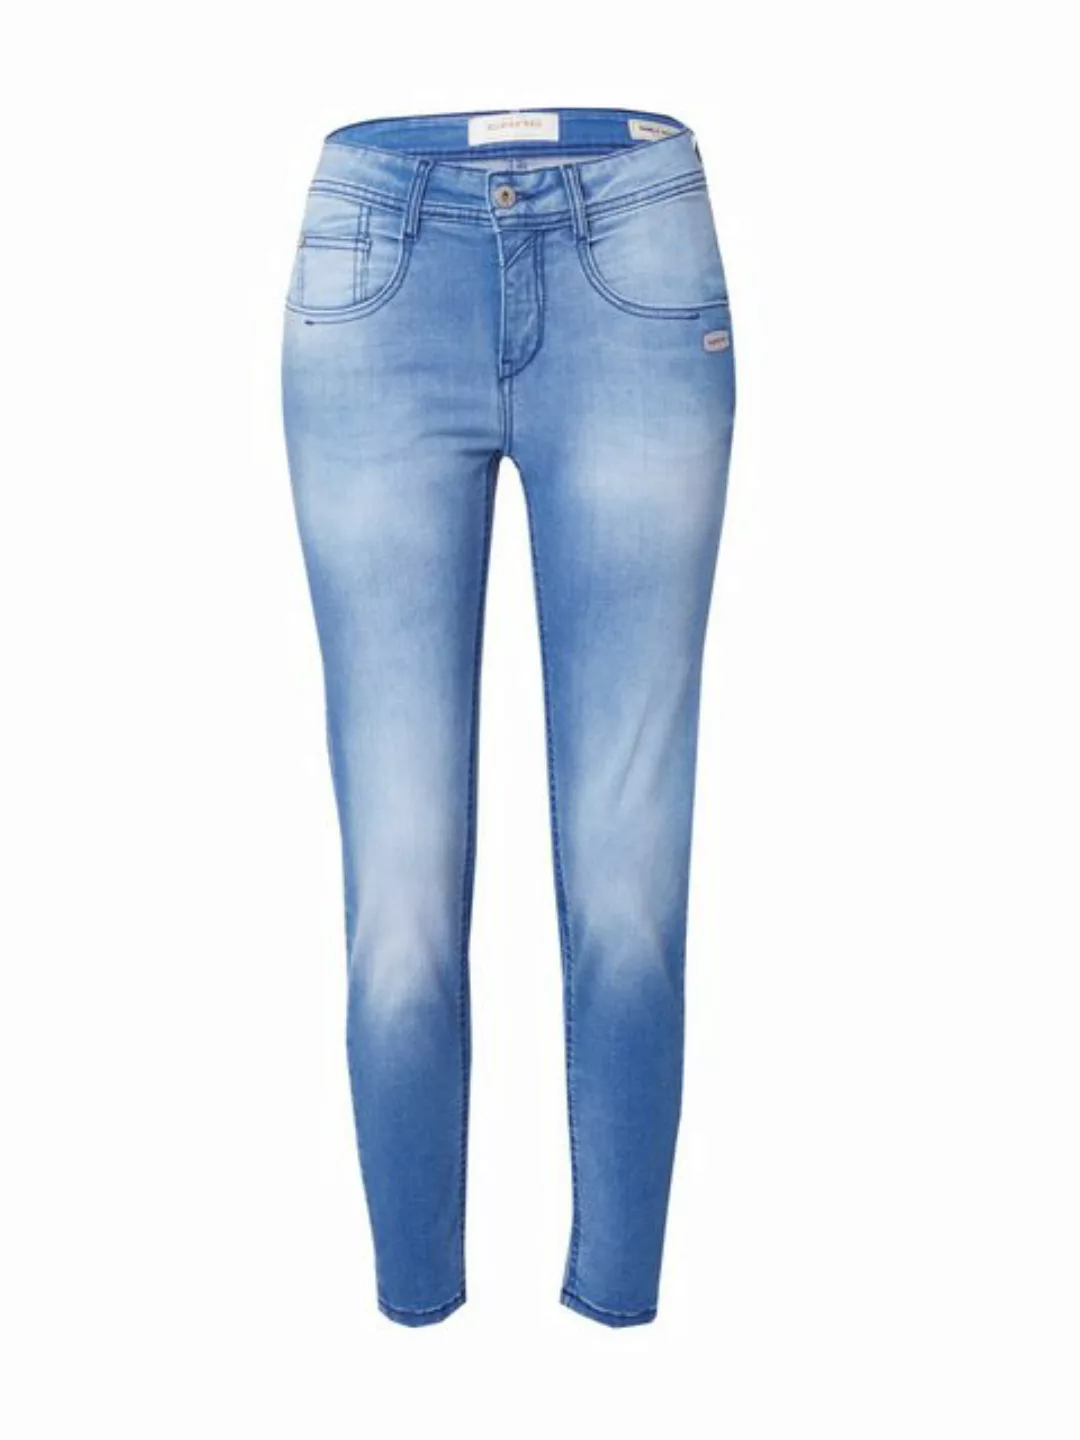 GANG Relax-fit-Jeans 94Amelie CROPPED - Relaxed fit günstig online kaufen